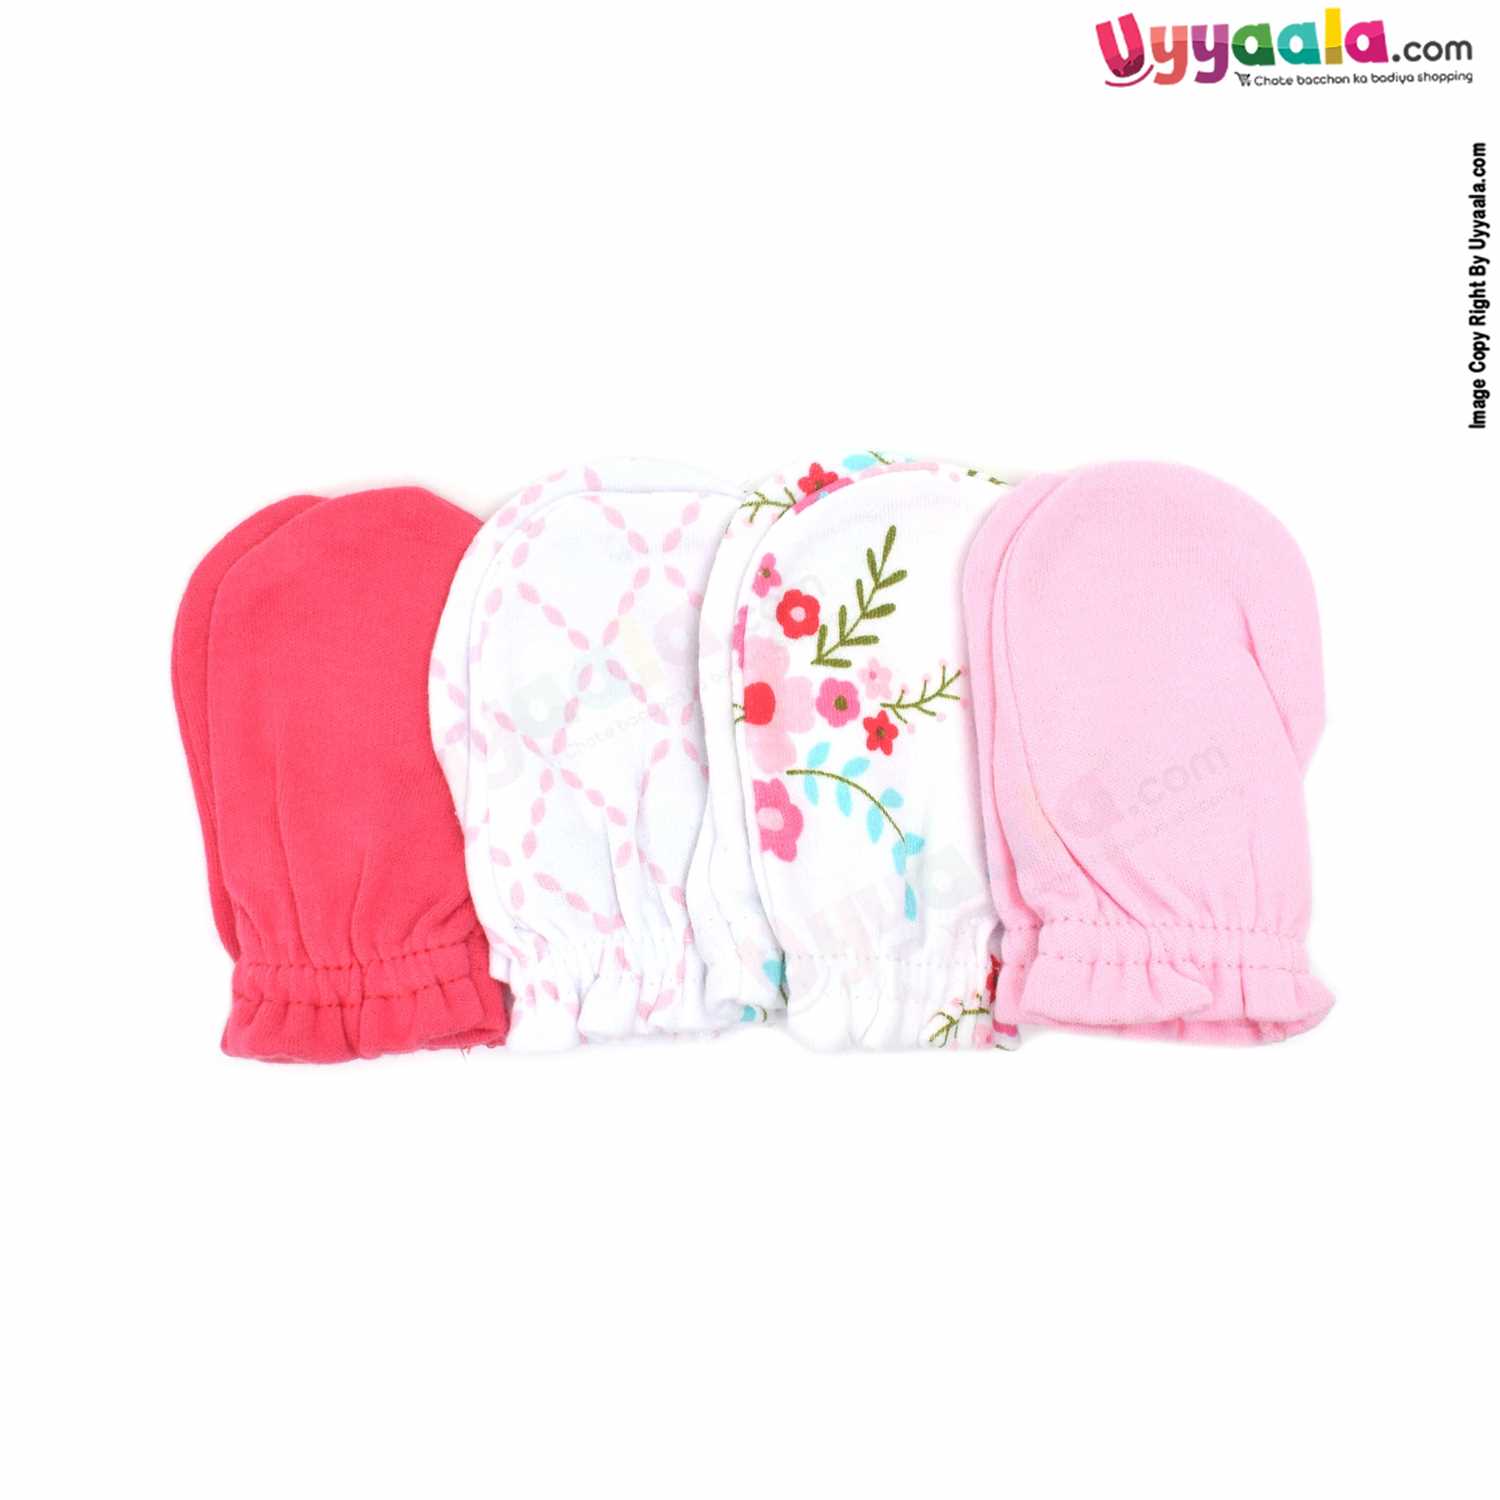 HUDSON BABY 5 Piece Caps Sets Mittens with Multi Print, 0-6m Age- Multi Color